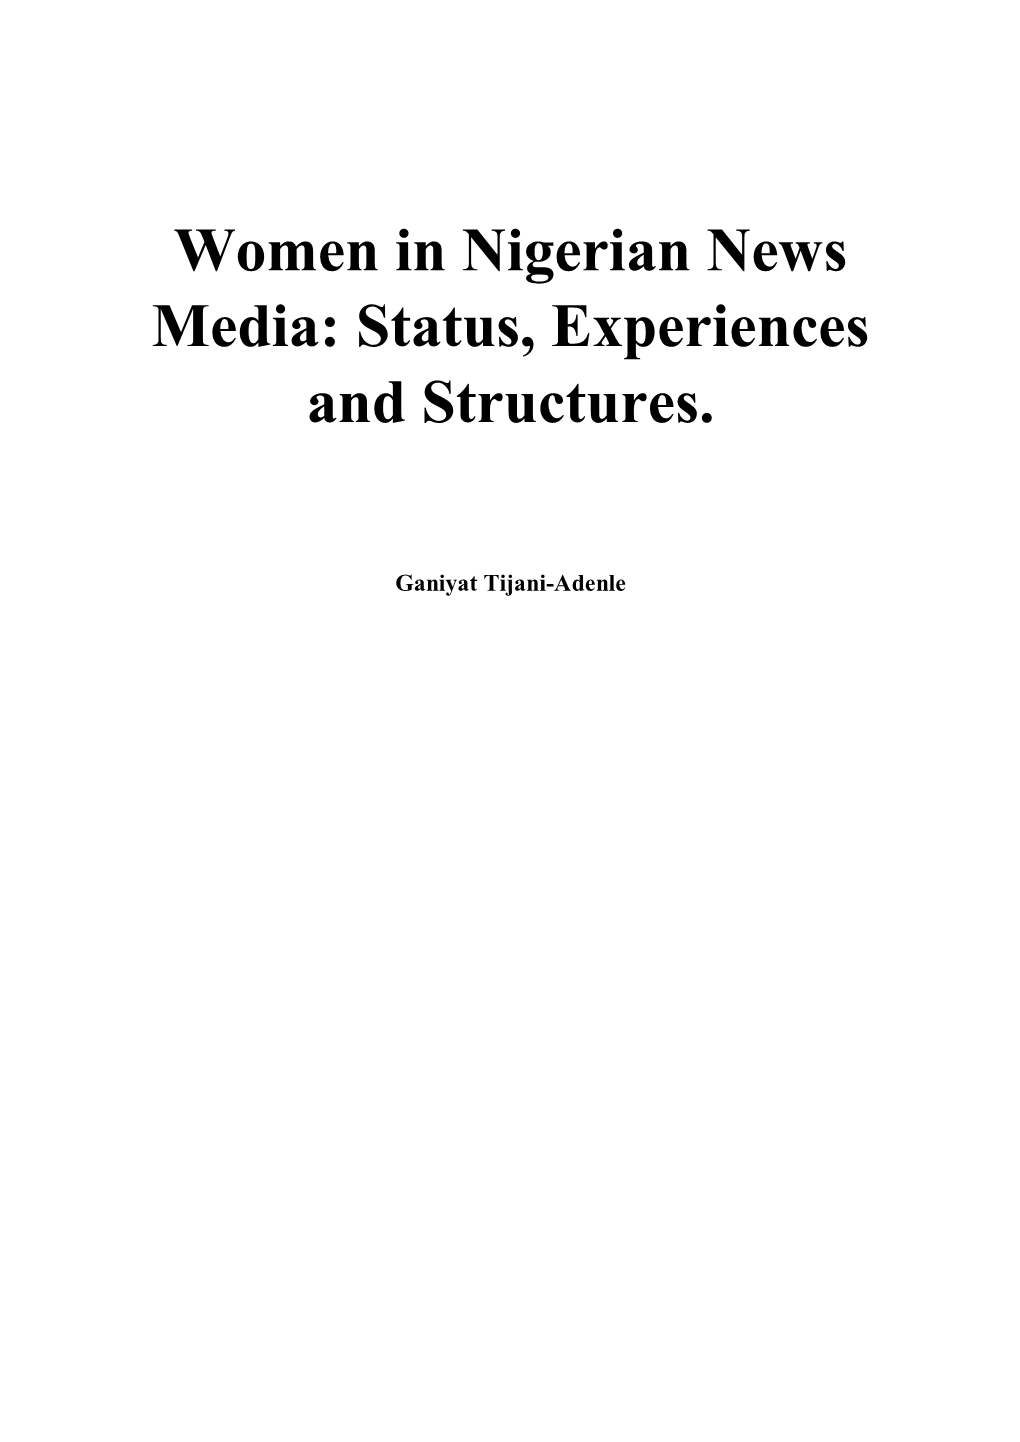 Women in Nigerian News Media: Status, Experiences and Structures